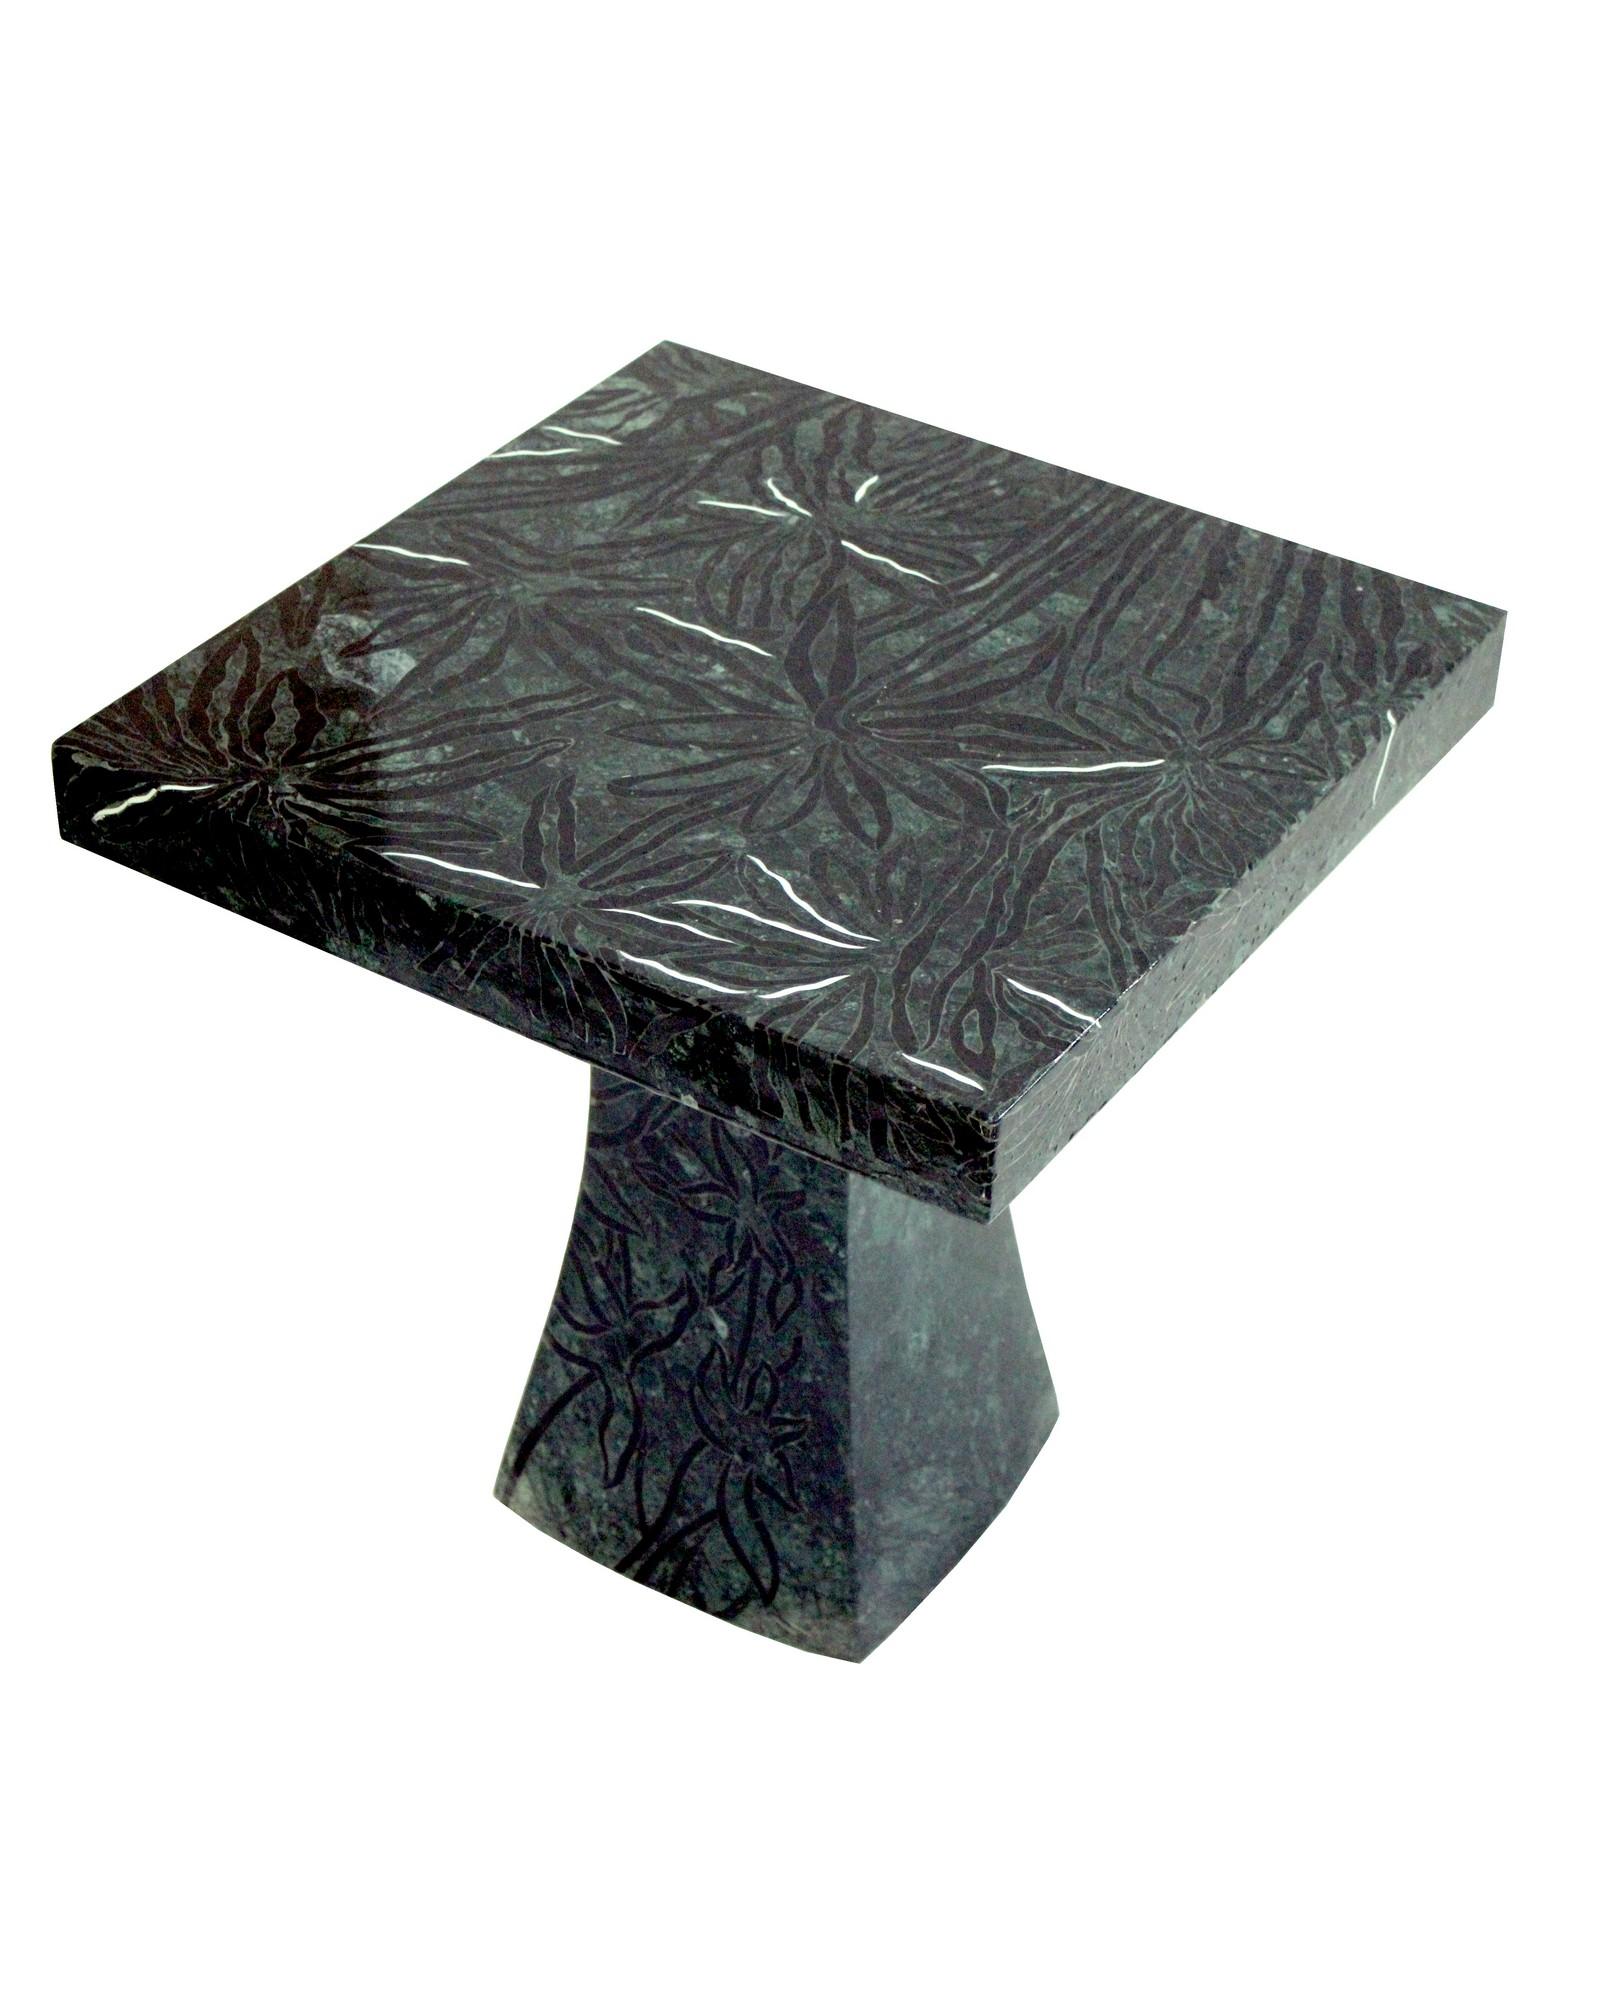 Other Set of Two Palms Tables in Green Marble Handcrafted in India For Sale